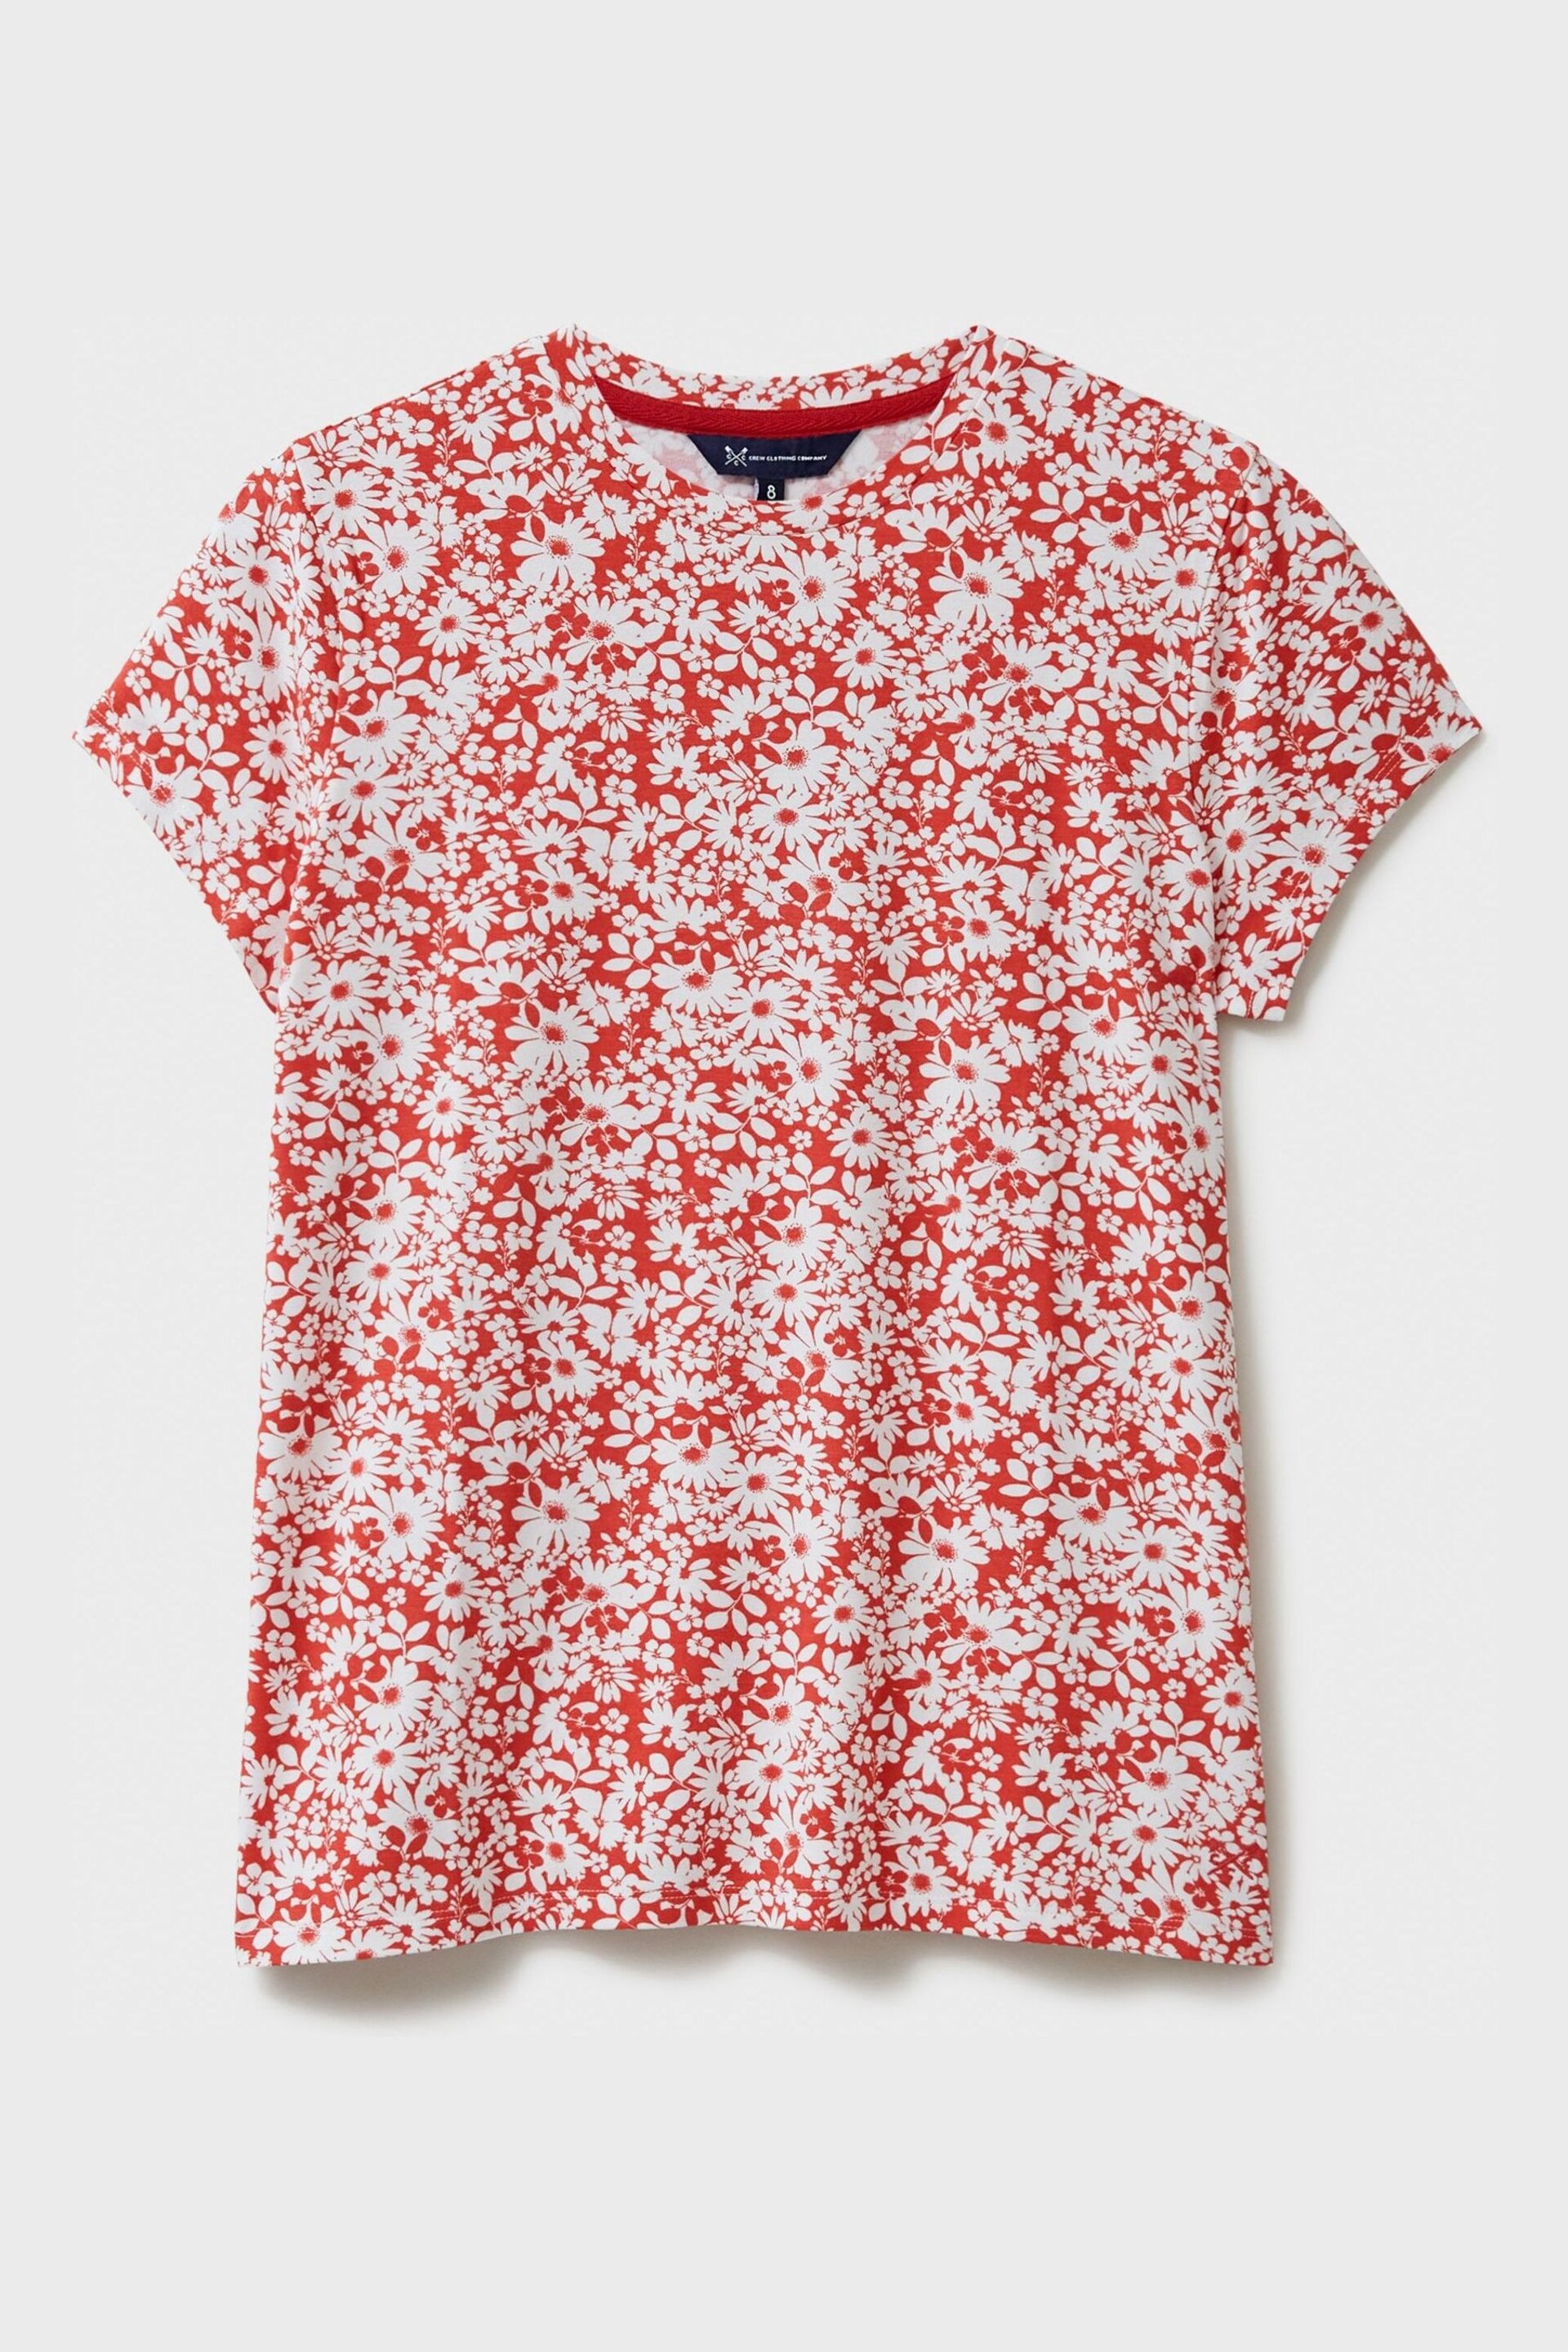 Crew Clothing Company Red Wine Floral Cotton Regular T-Shirt - Image 5 of 5